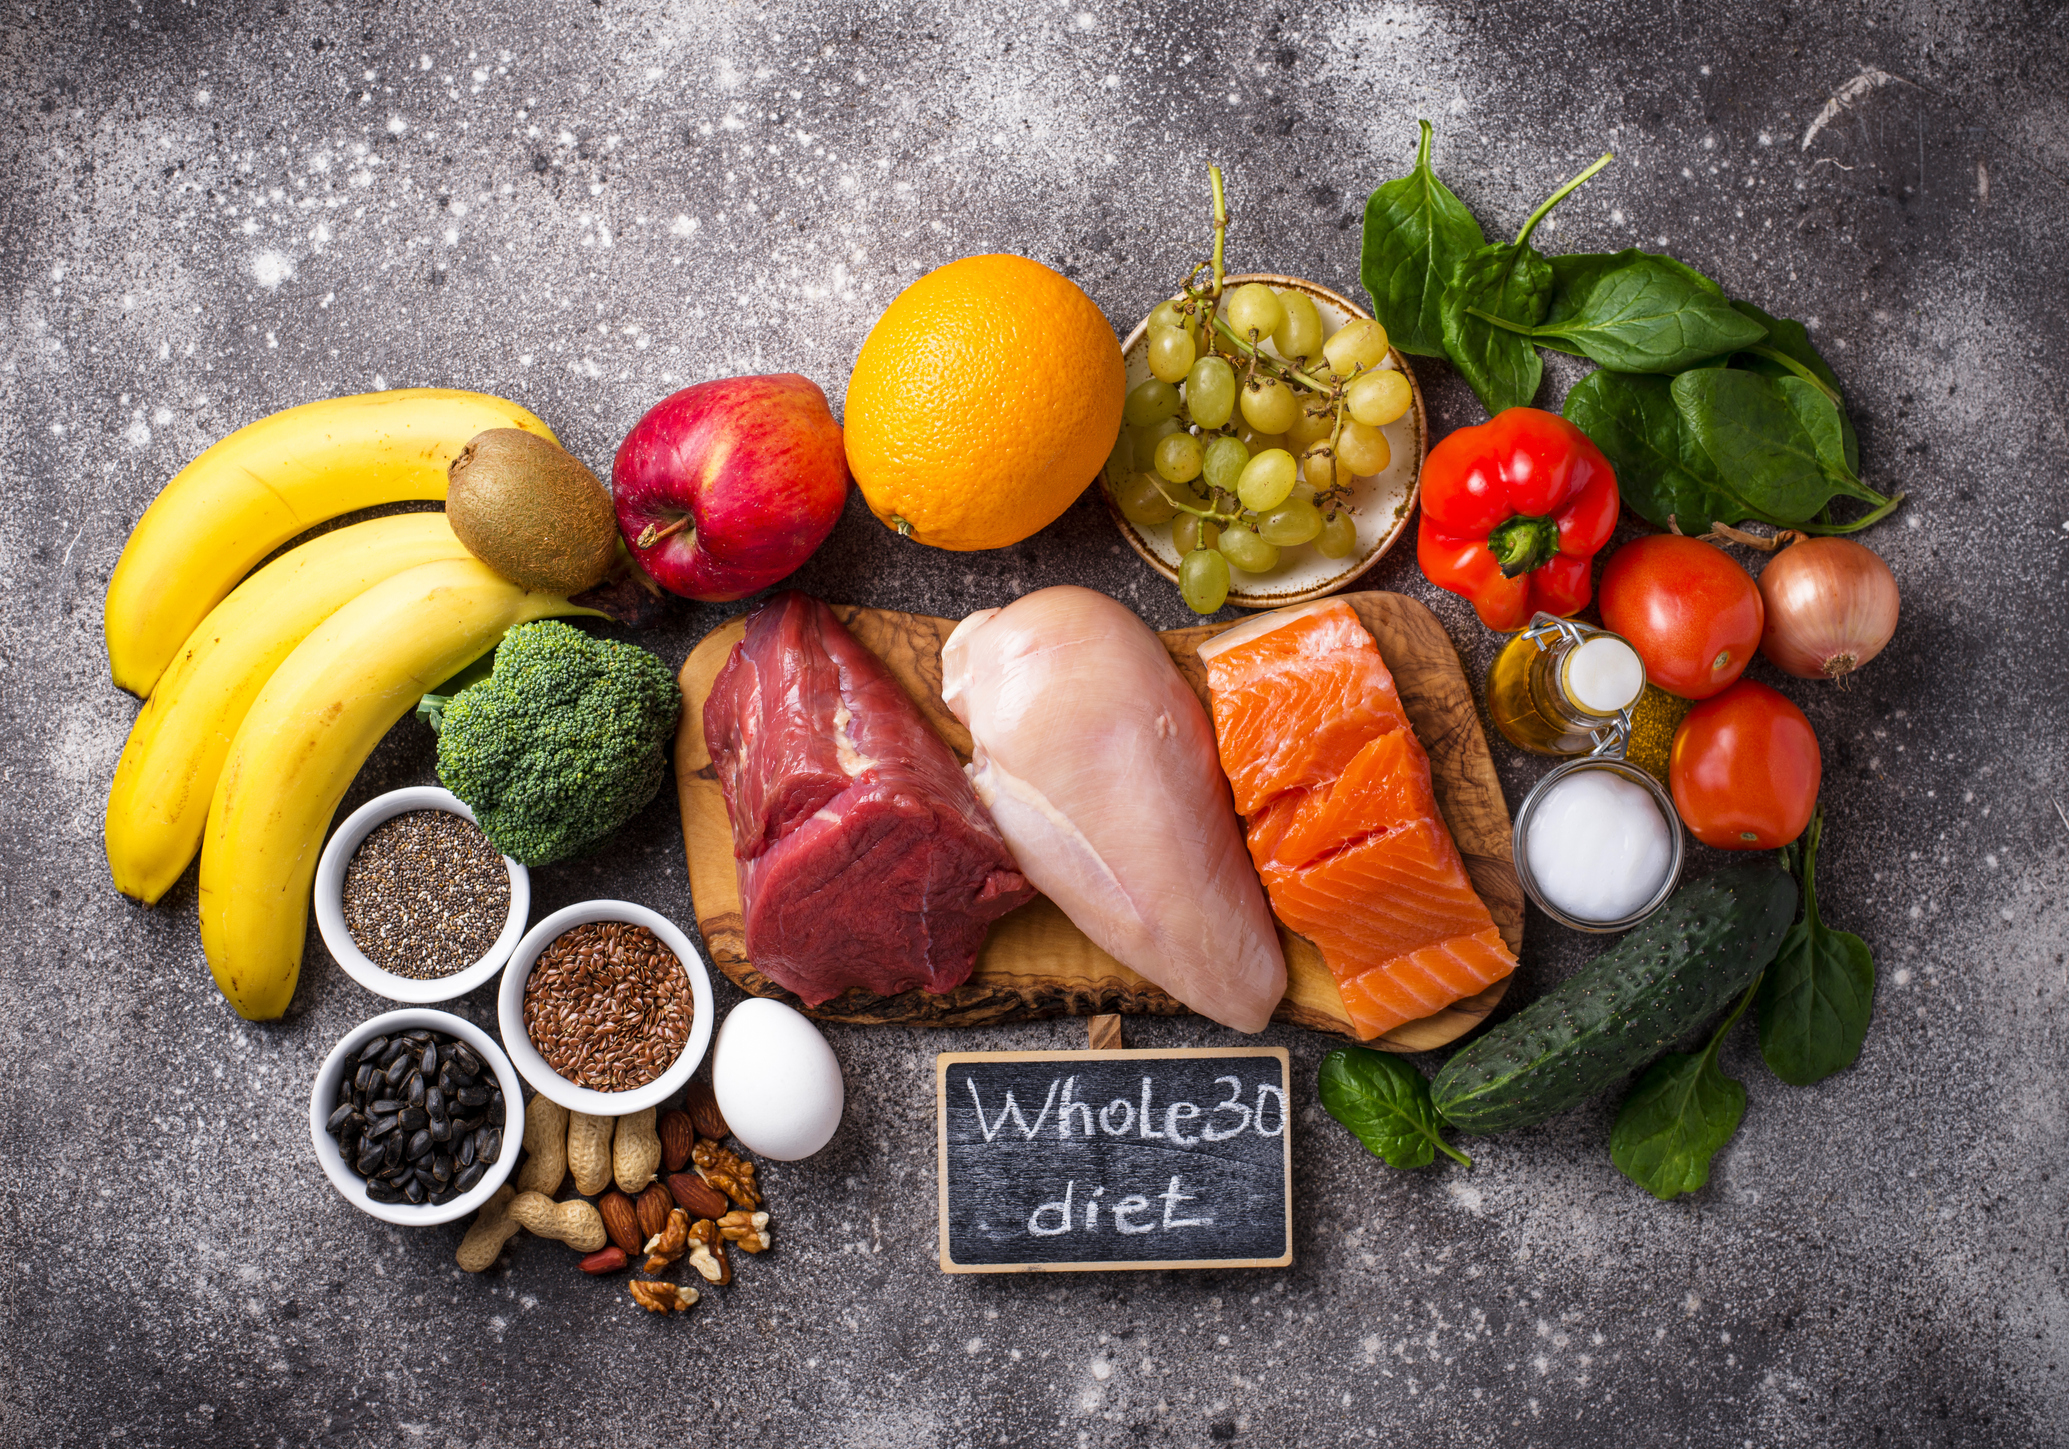 Whole30 Diet: Beginner's Guide, What to Eat and Avoid, Advantages, and More  - Athletic Insight